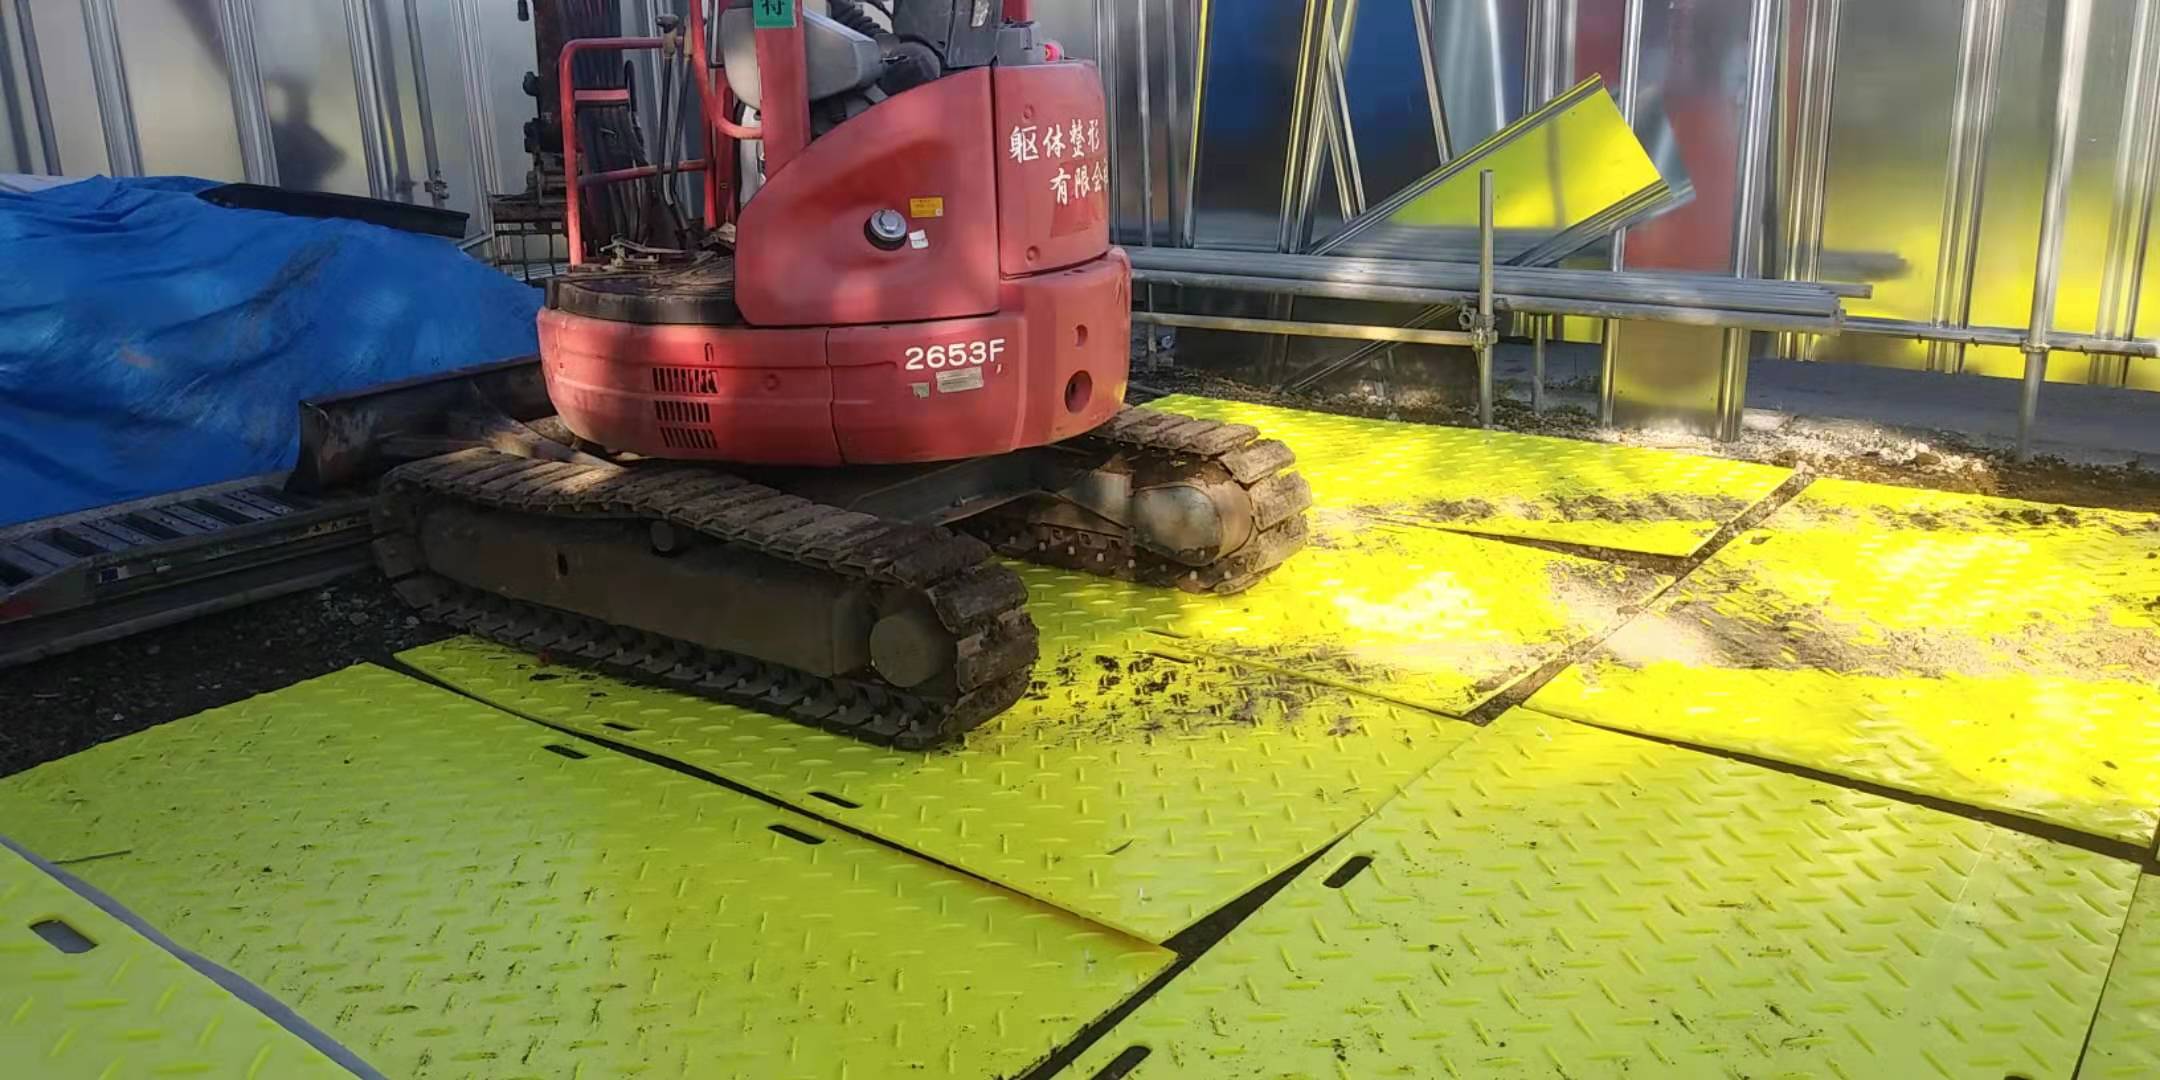 ground protection mats